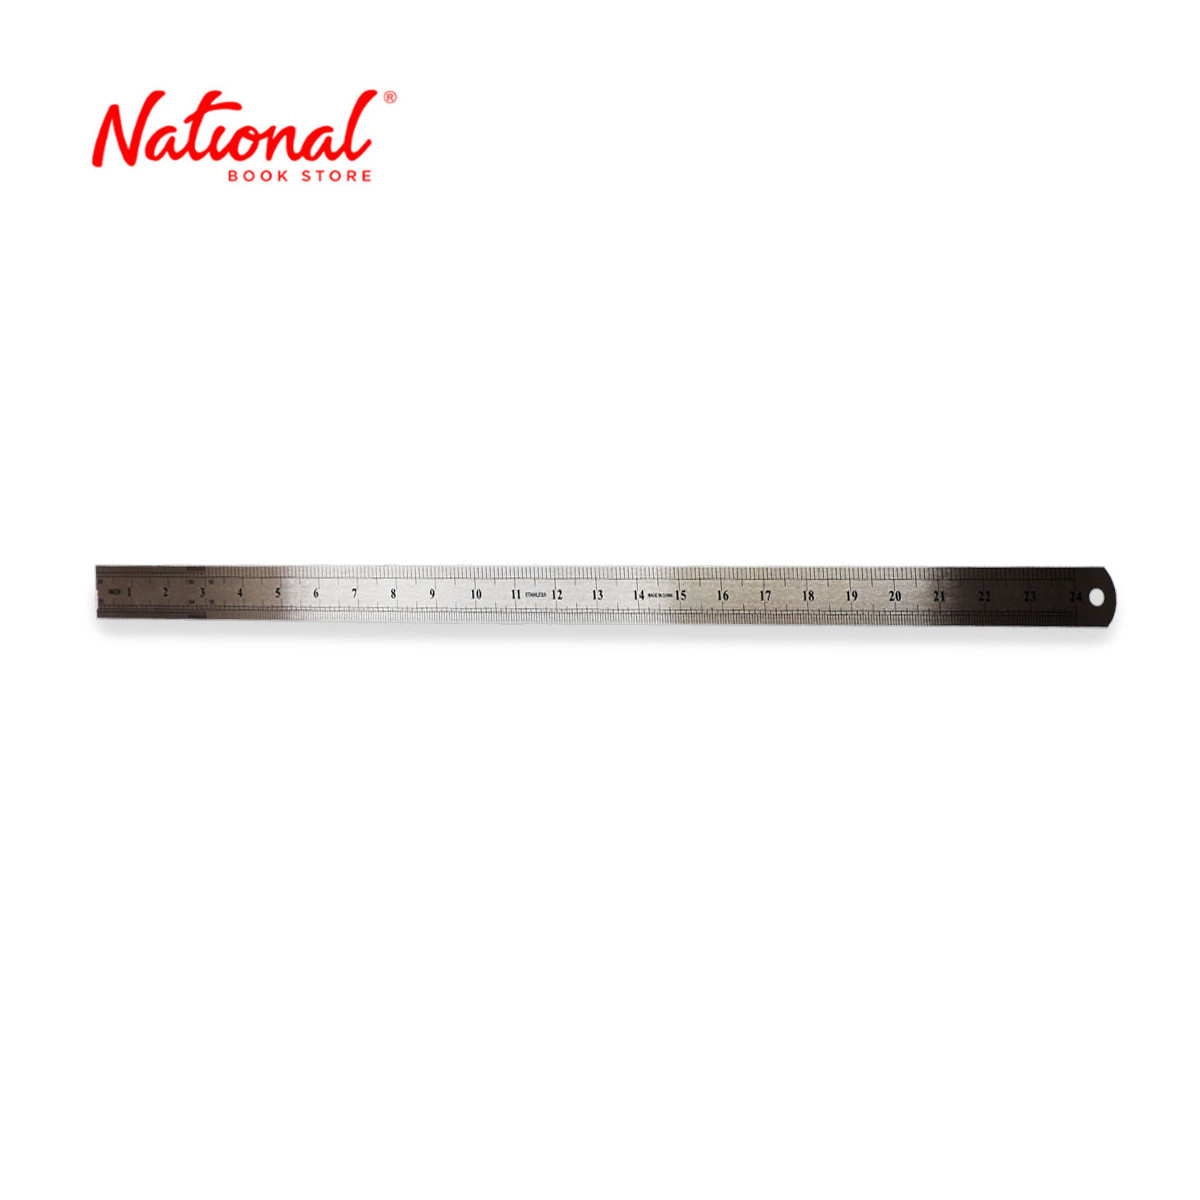 Steel Ruler 24 inches JSH 0760 - School & Office Supplies